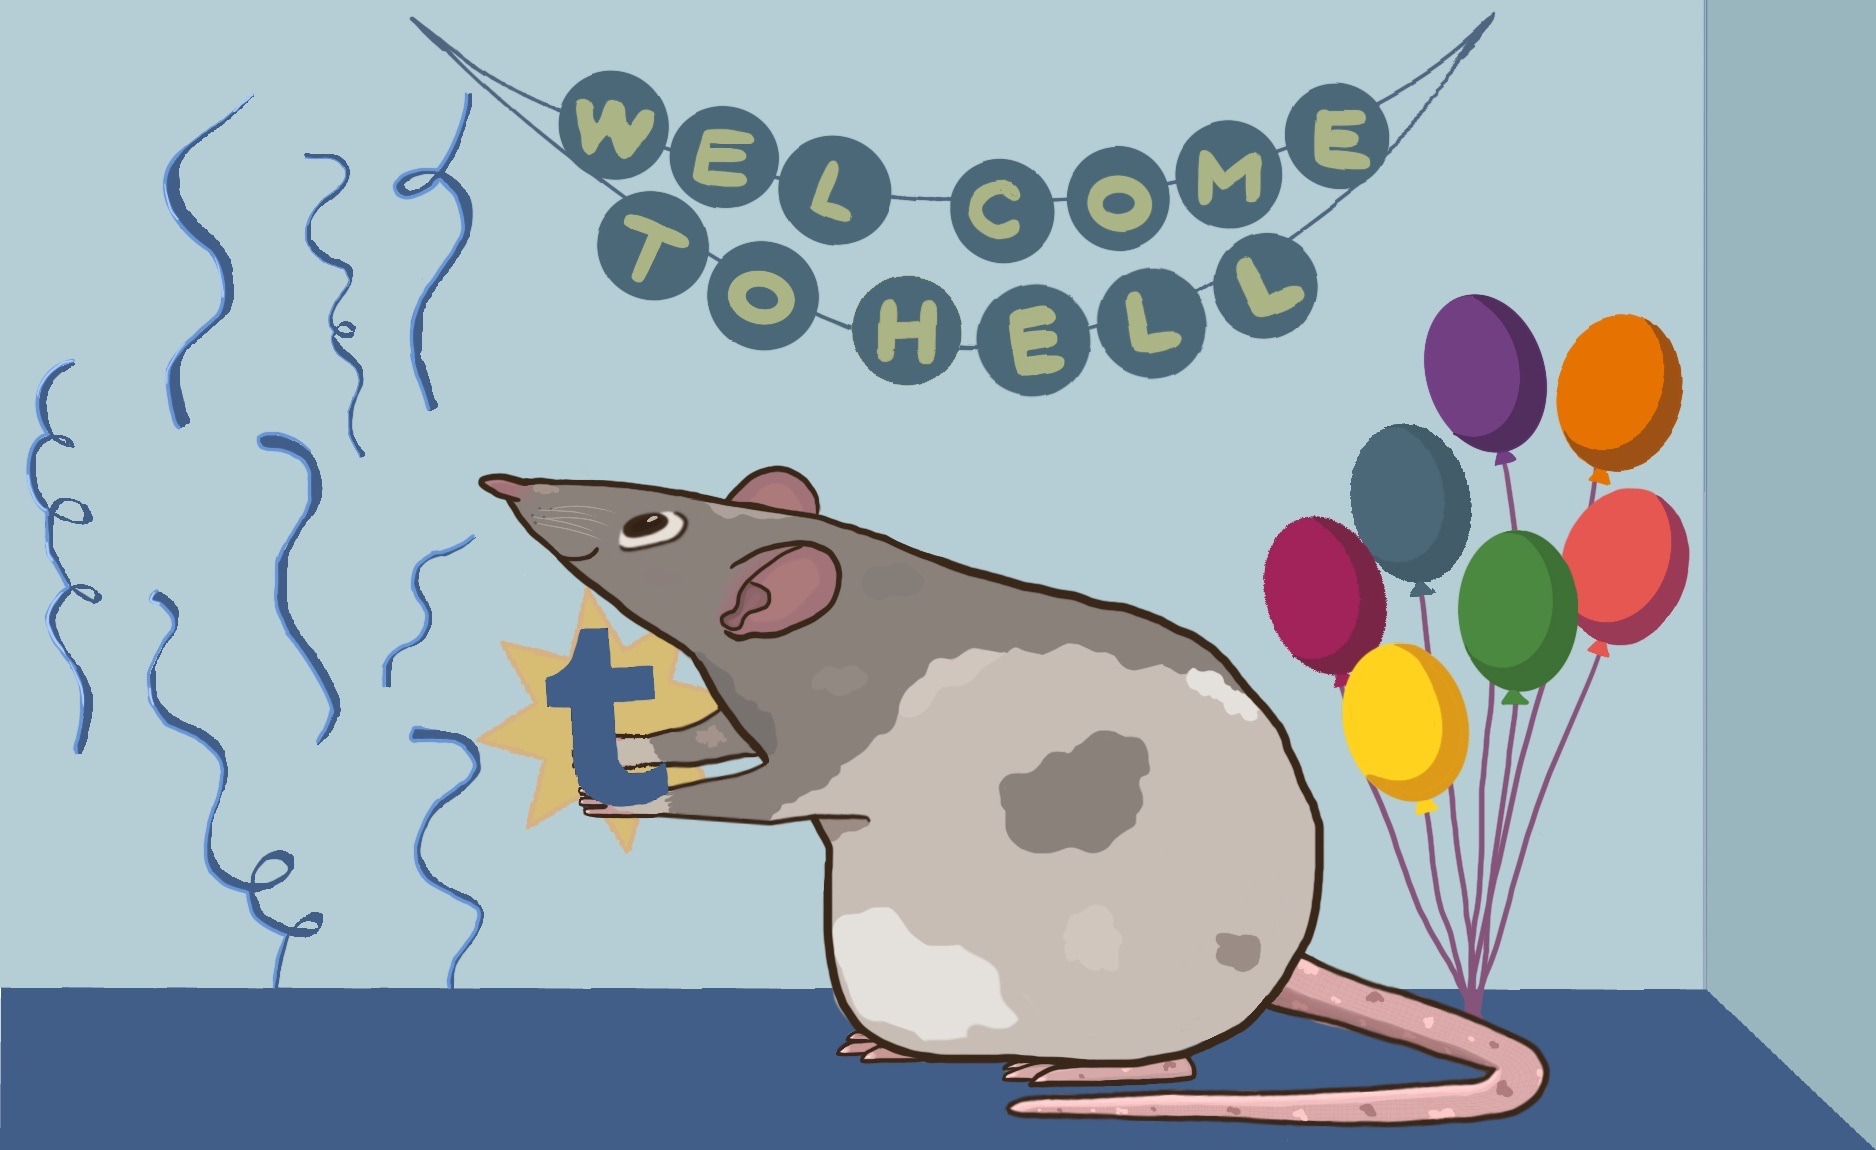 Rat holding the tumblr "T", streamers in the air, balloons, and the banner from the RE2 remake that says "welcome to hell"